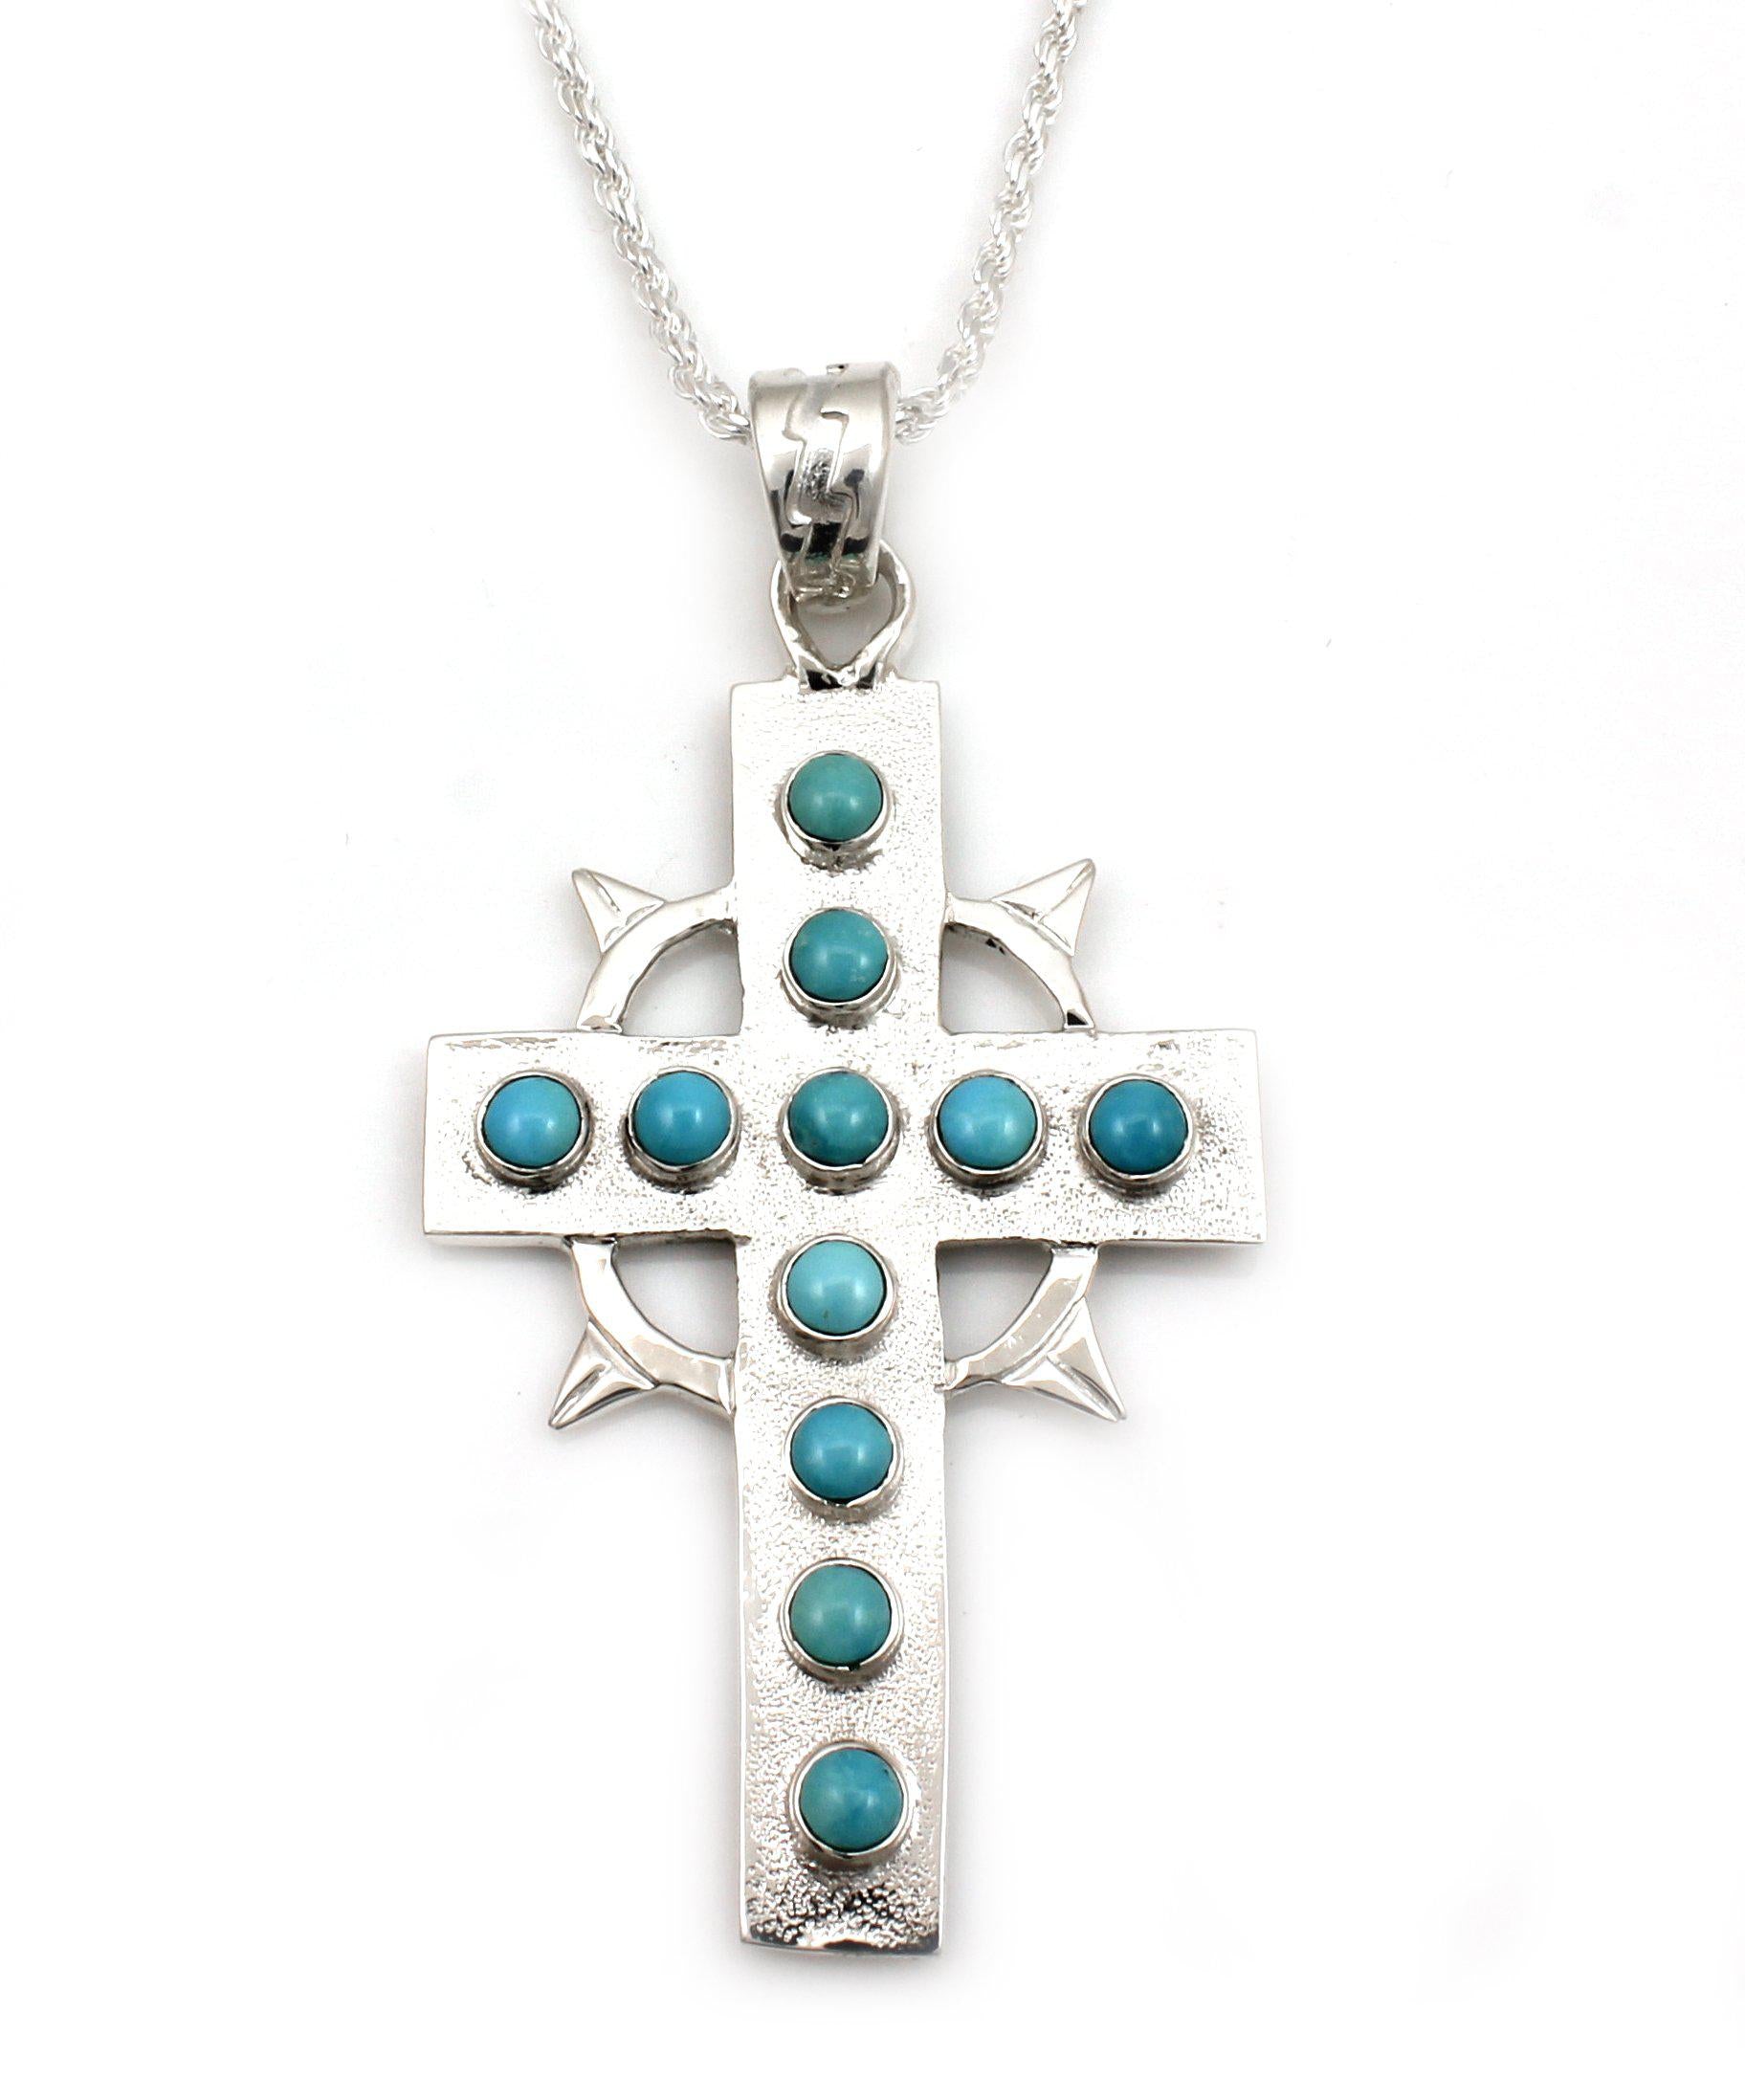 Spikes and Circle Cross Pendant-Jewelry-Ben Nighthorse-Sorrel Sky Gallery